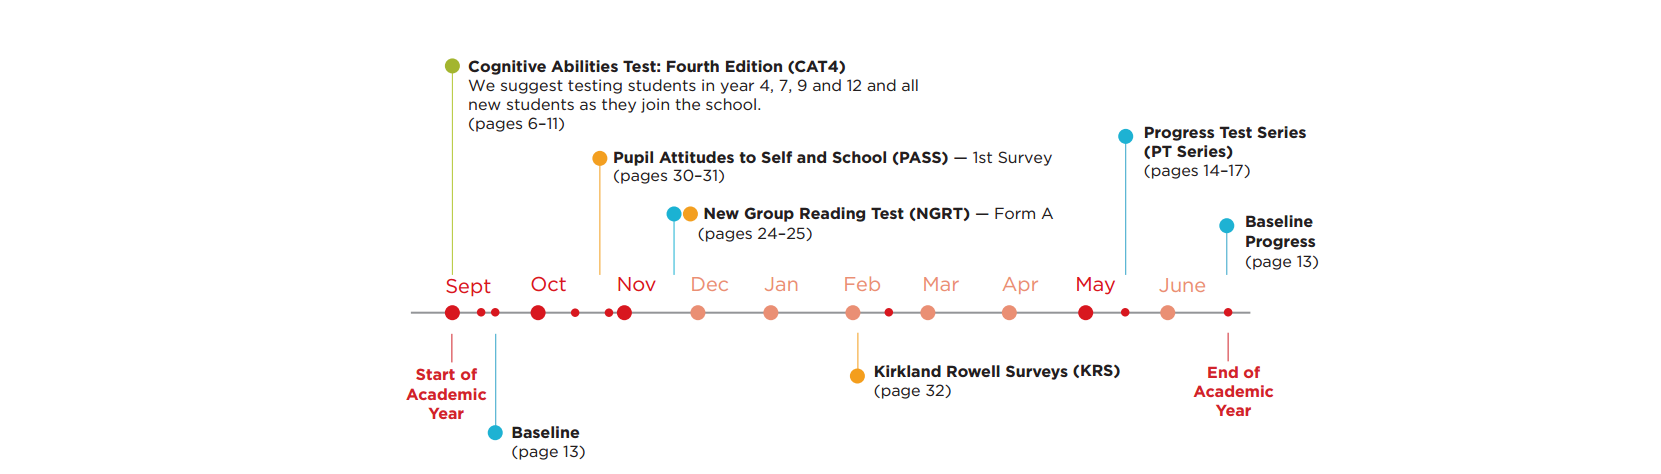 A timeline of when to use the tests during the academic year